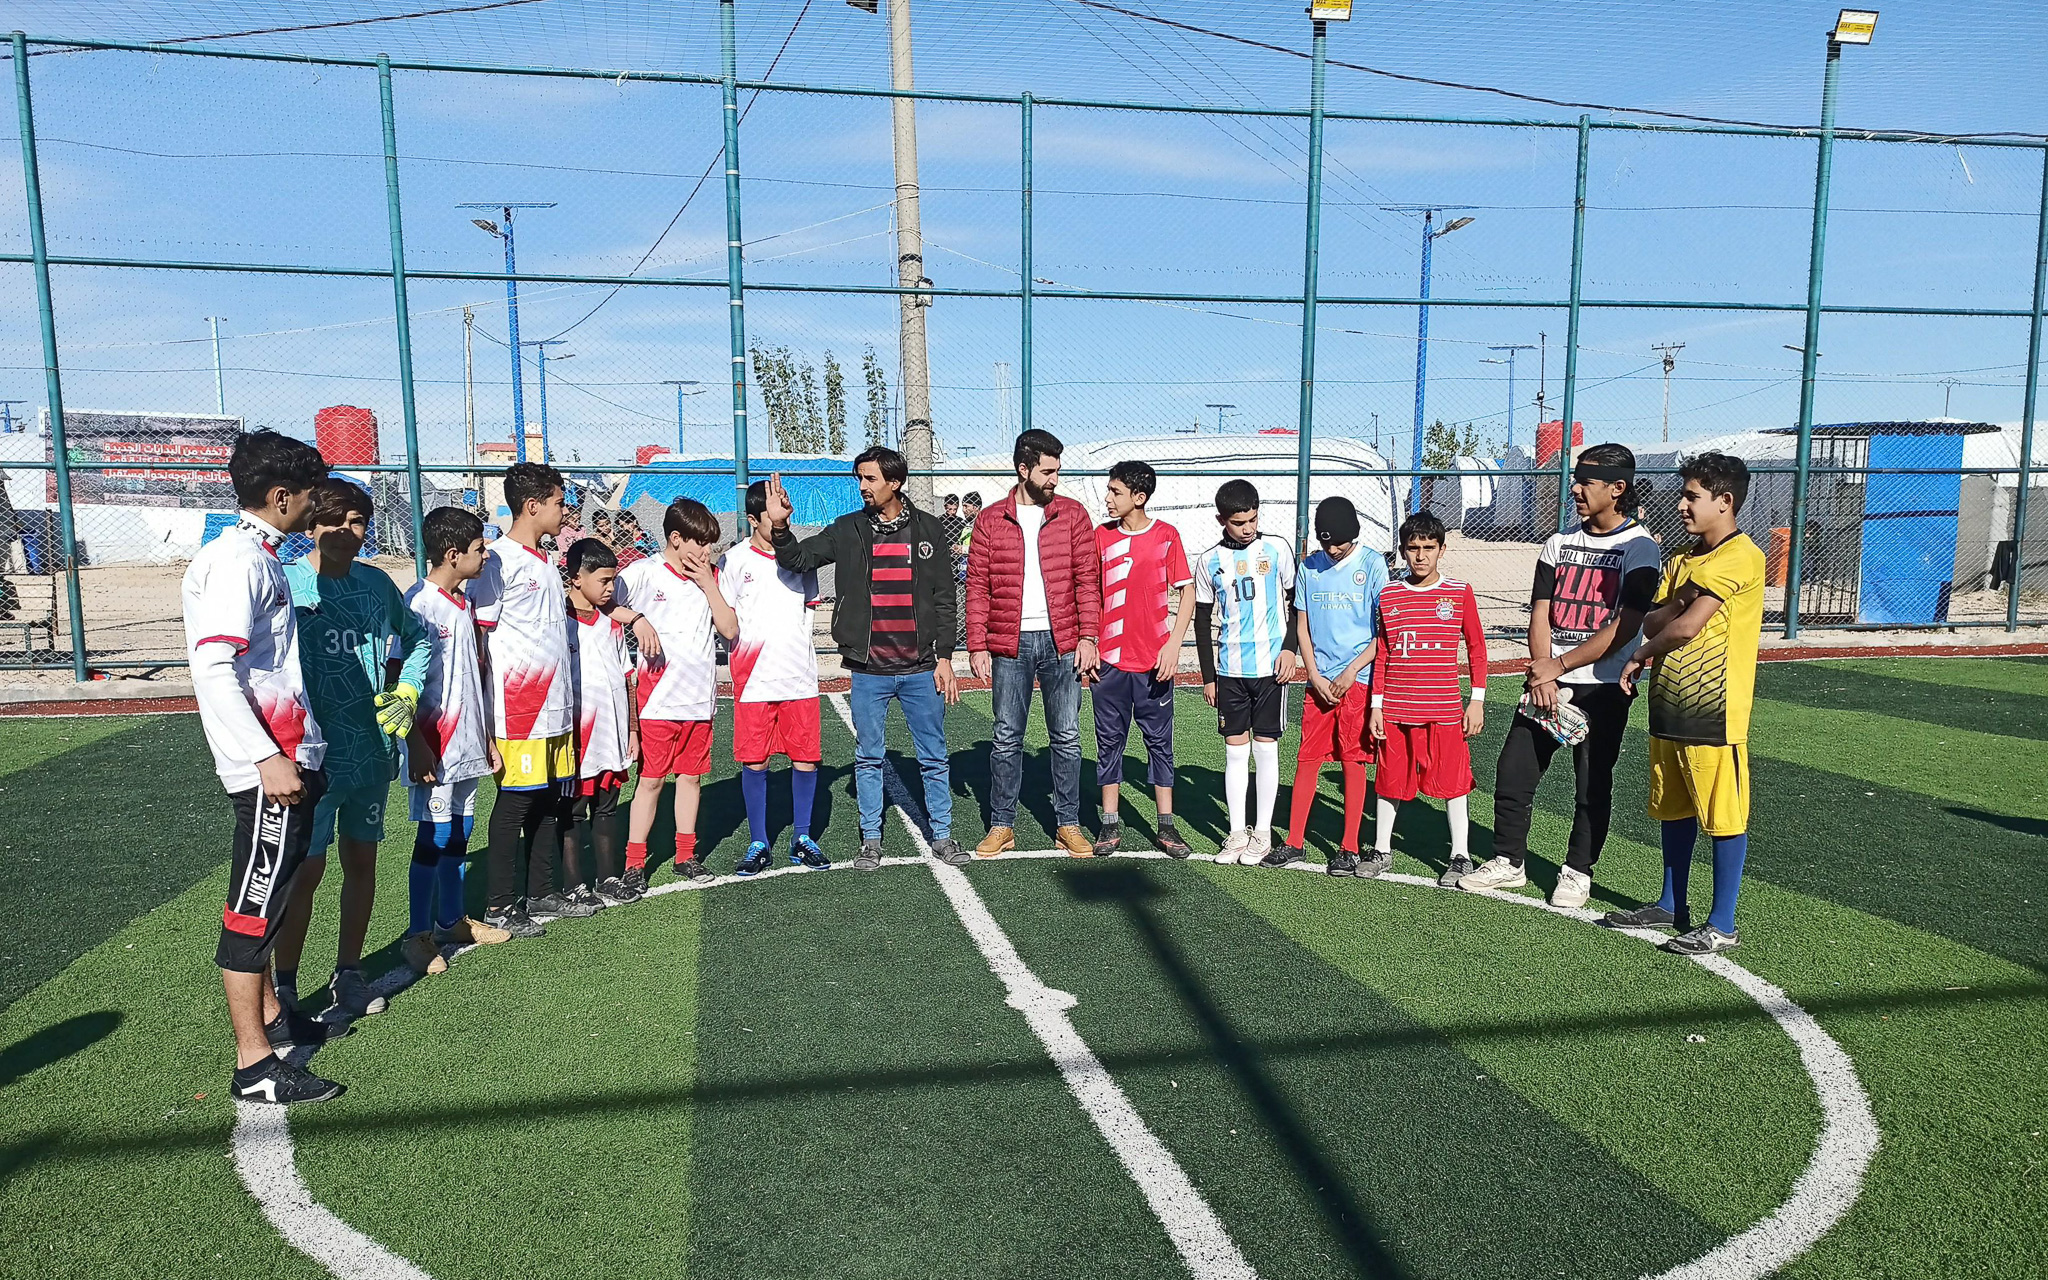 Soccer Star and Community Leader in Syria Camp Inspires Change through Sports